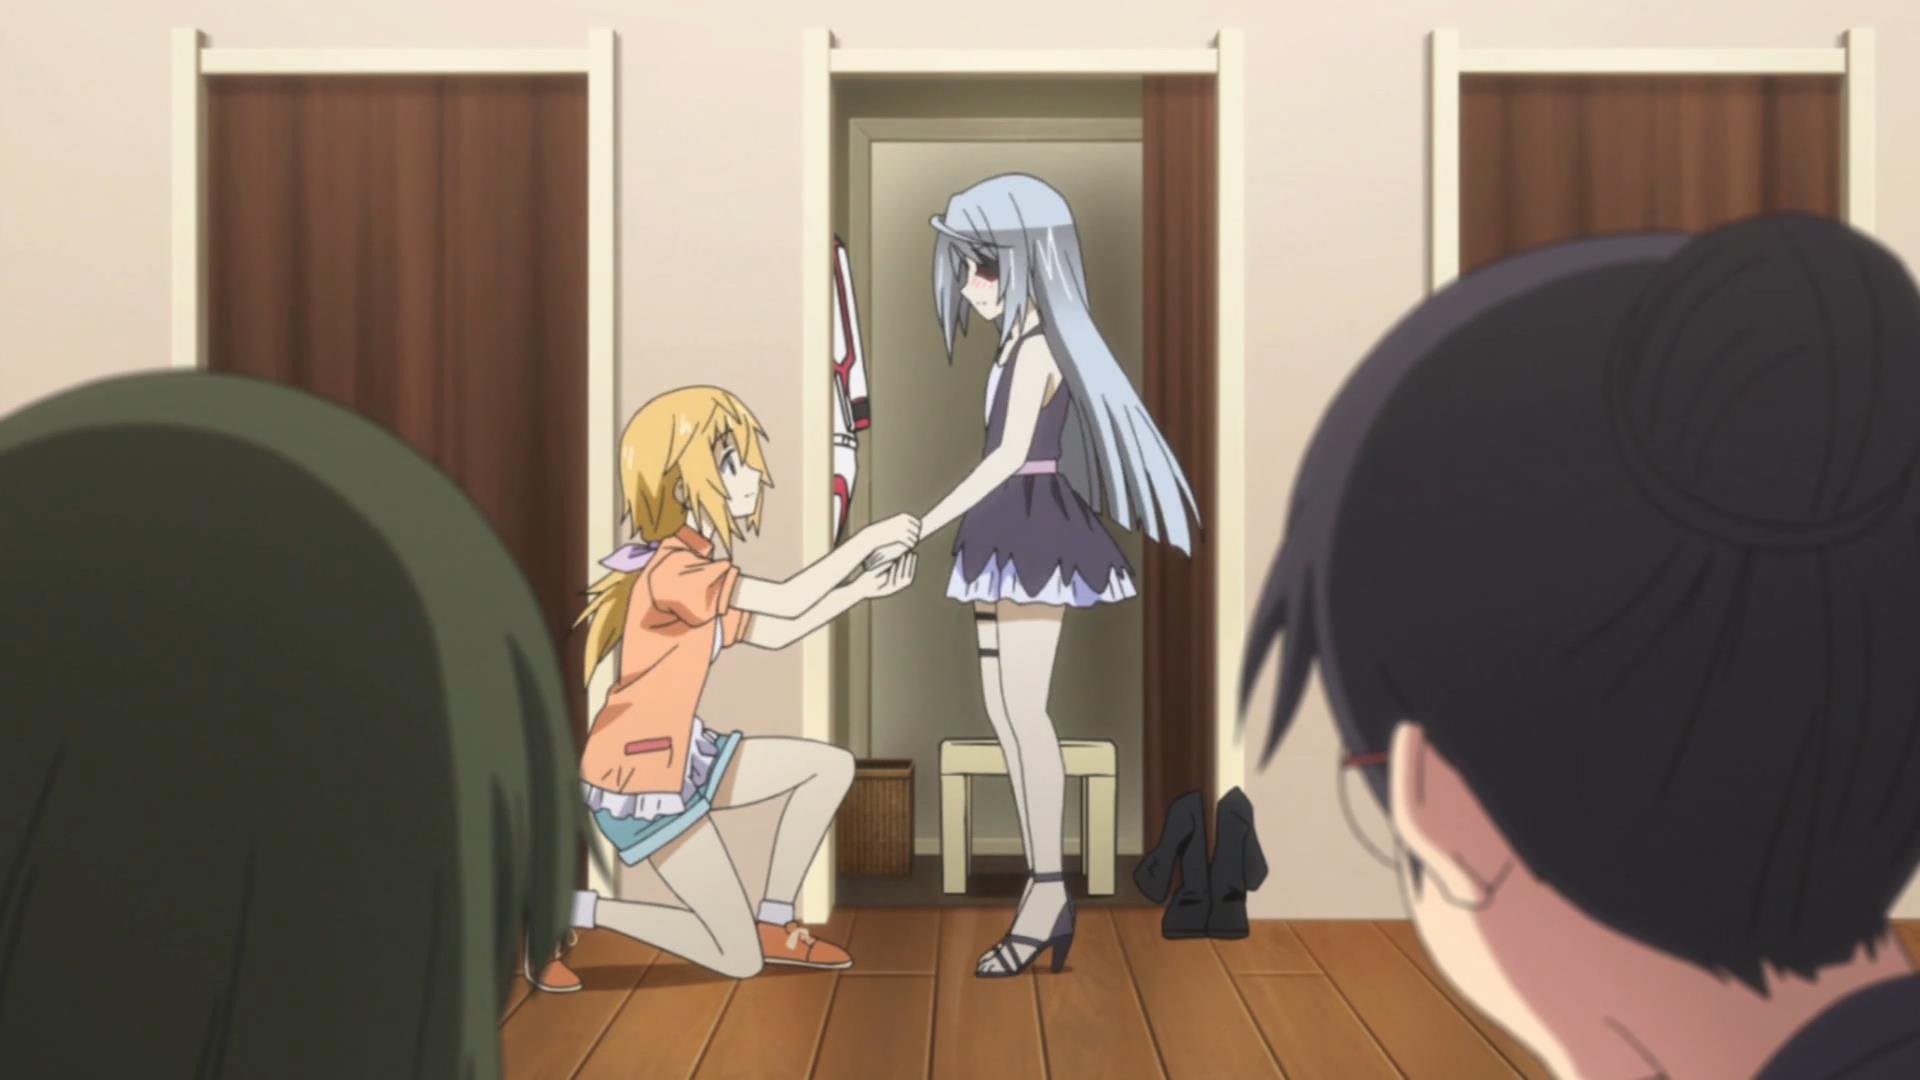 And of course, I talk about Infinite Stratos 2. Now, I’m not too ...